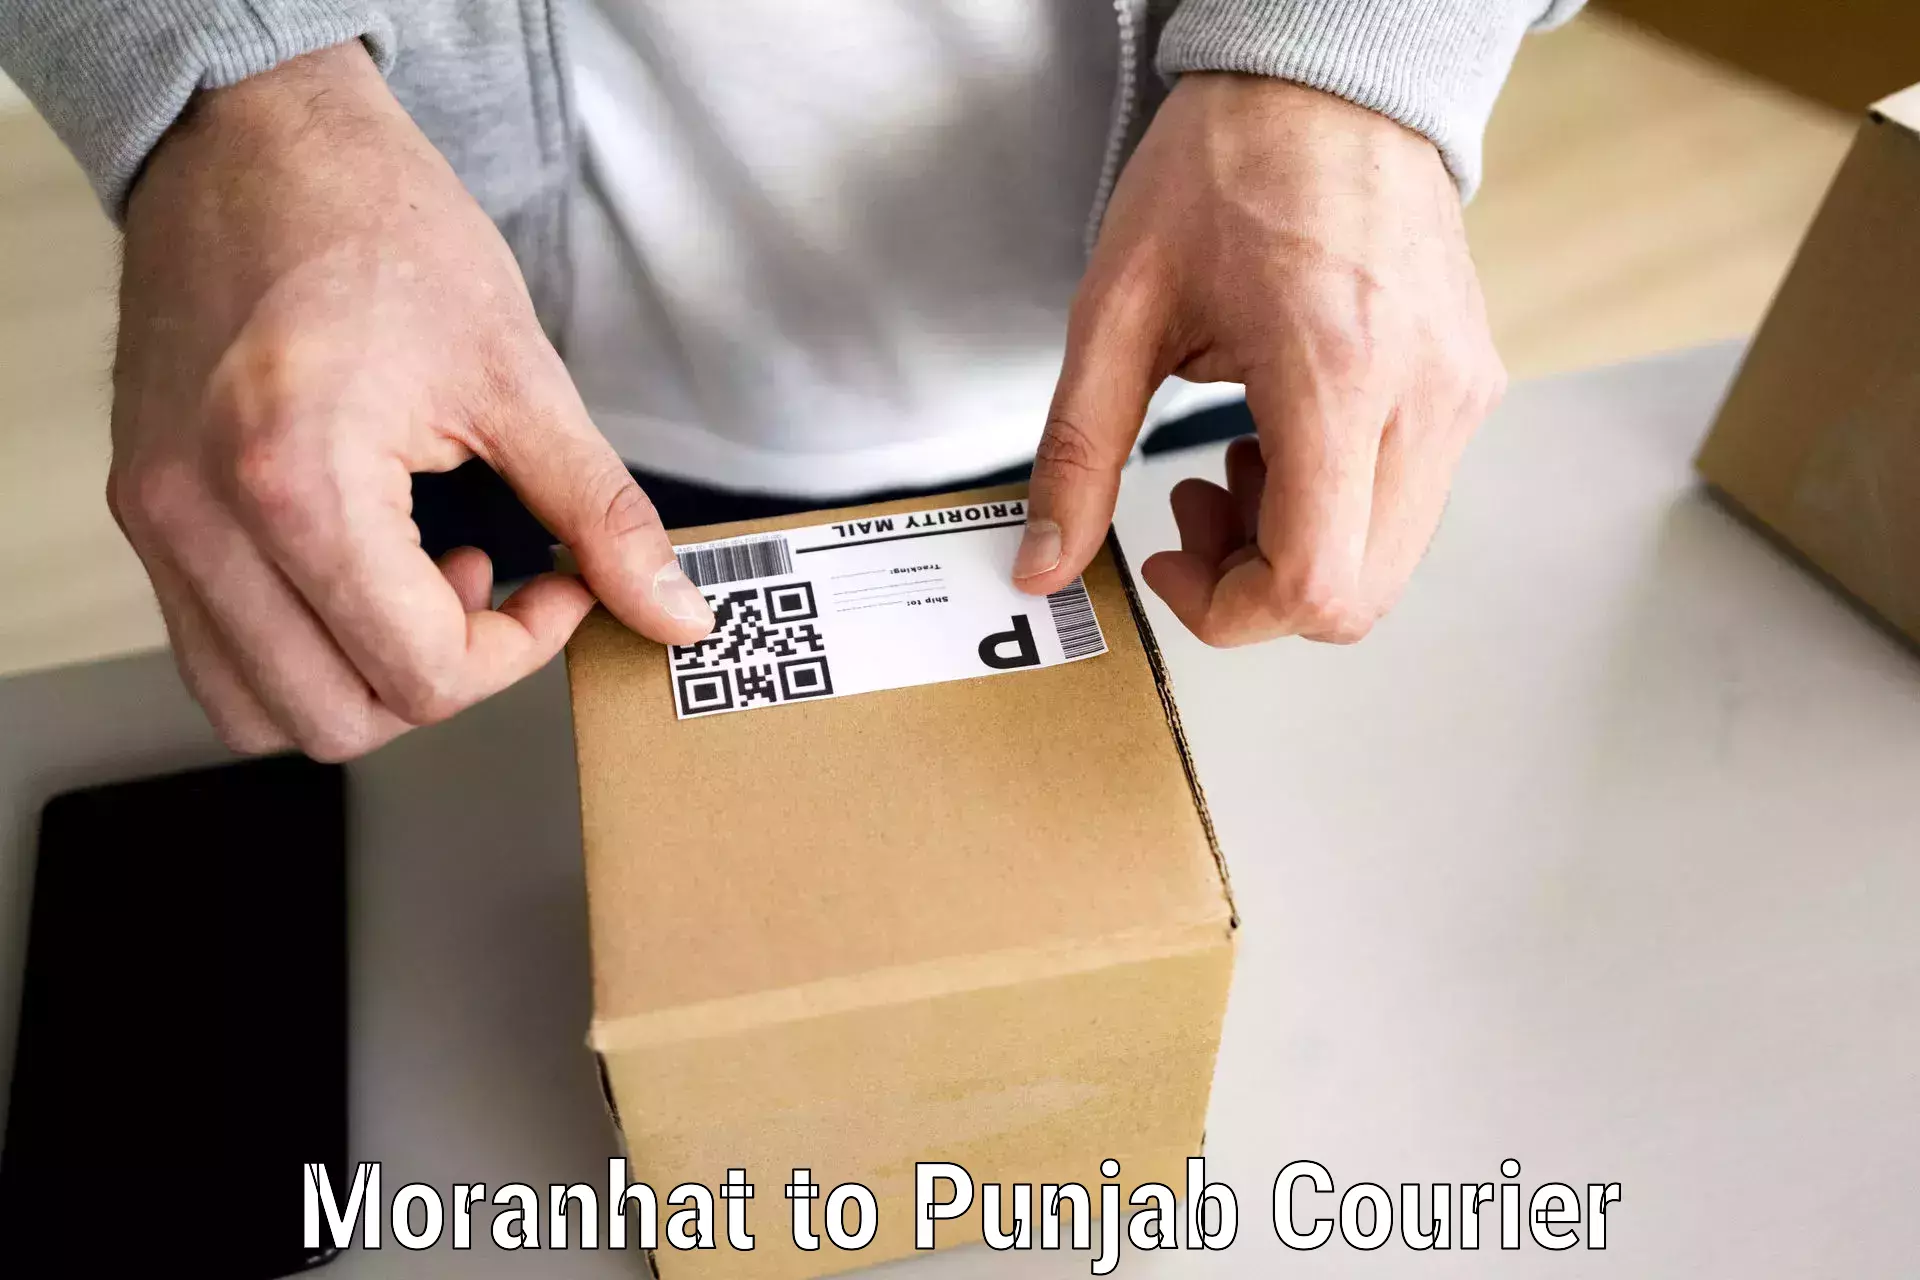 Efficient household movers Moranhat to Mohali